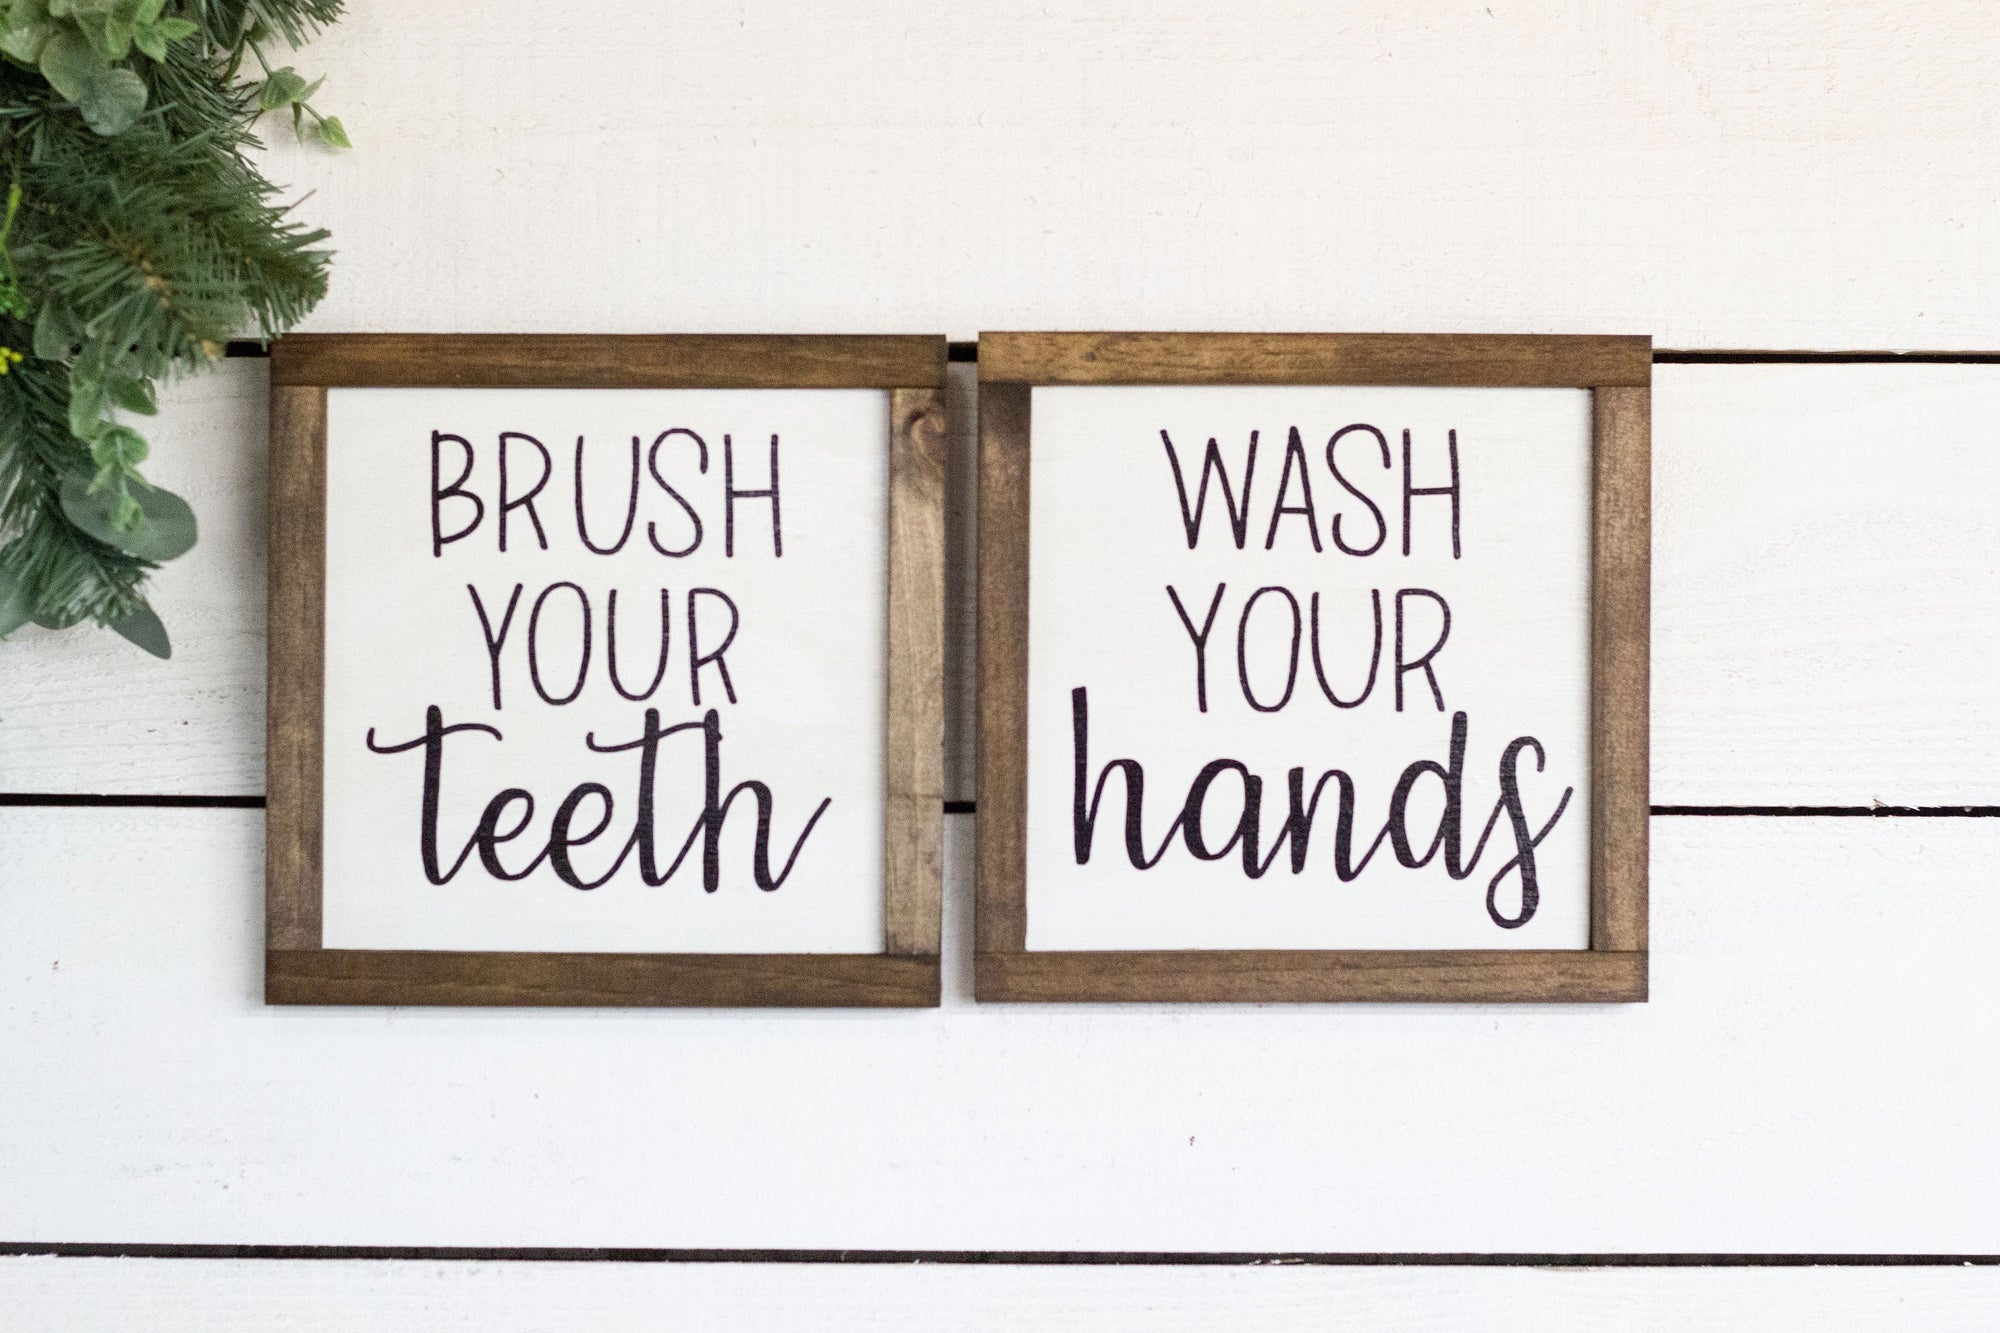 Brush your Teeth, Wash Your Hands (Set of 2 farmhouse bathroom Wood Signs)